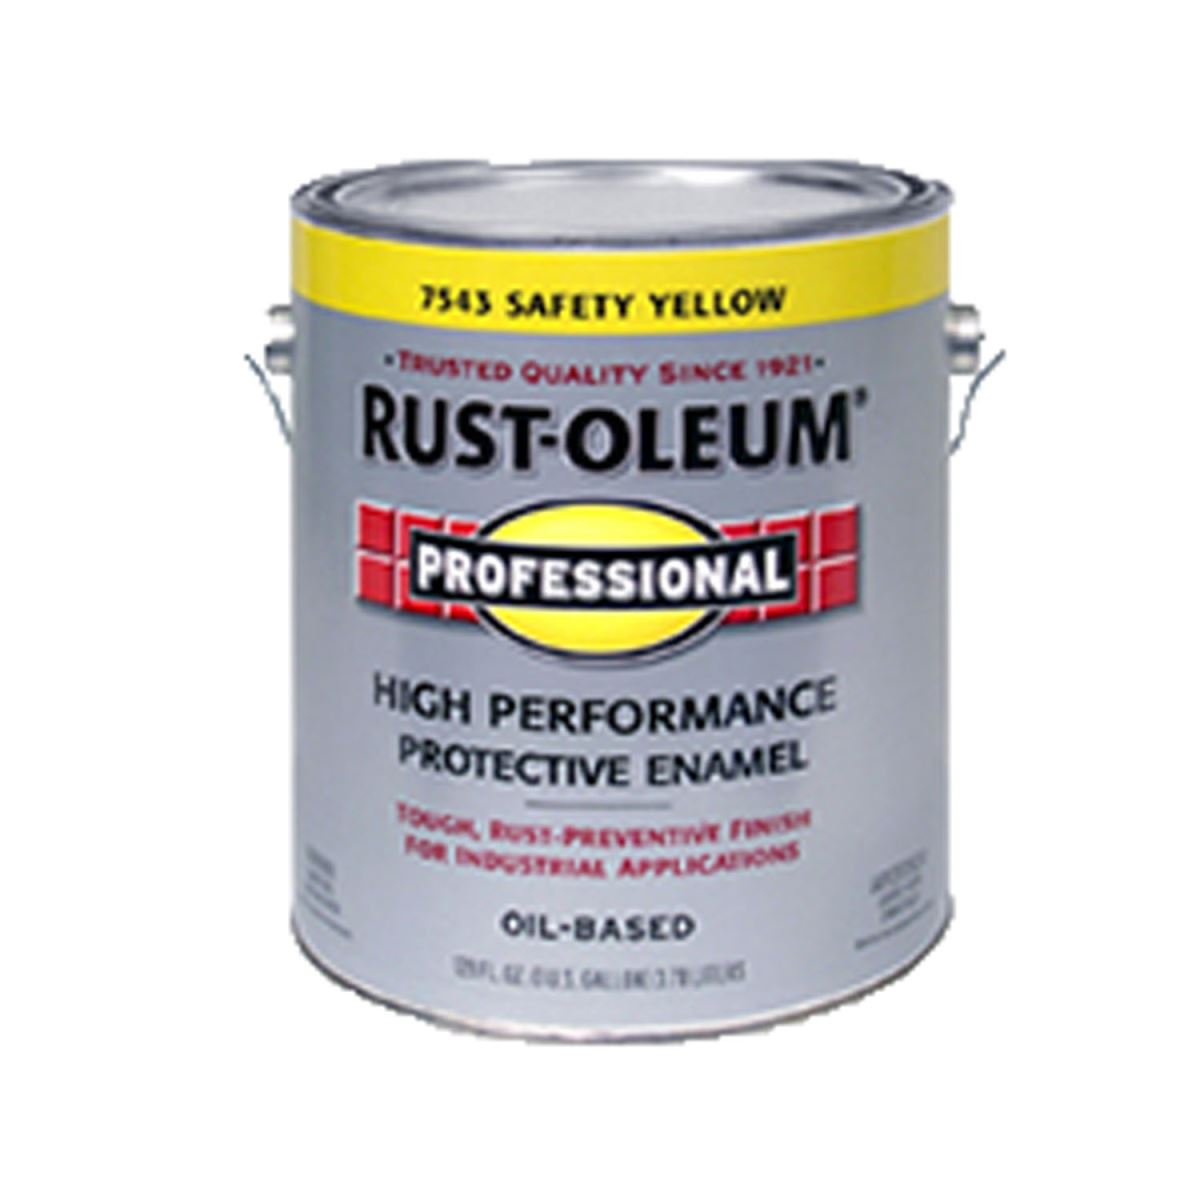 1 GALLON SAFETY YELLOW HIGH PERFORMANCE PROTECTIVE ENAMEL